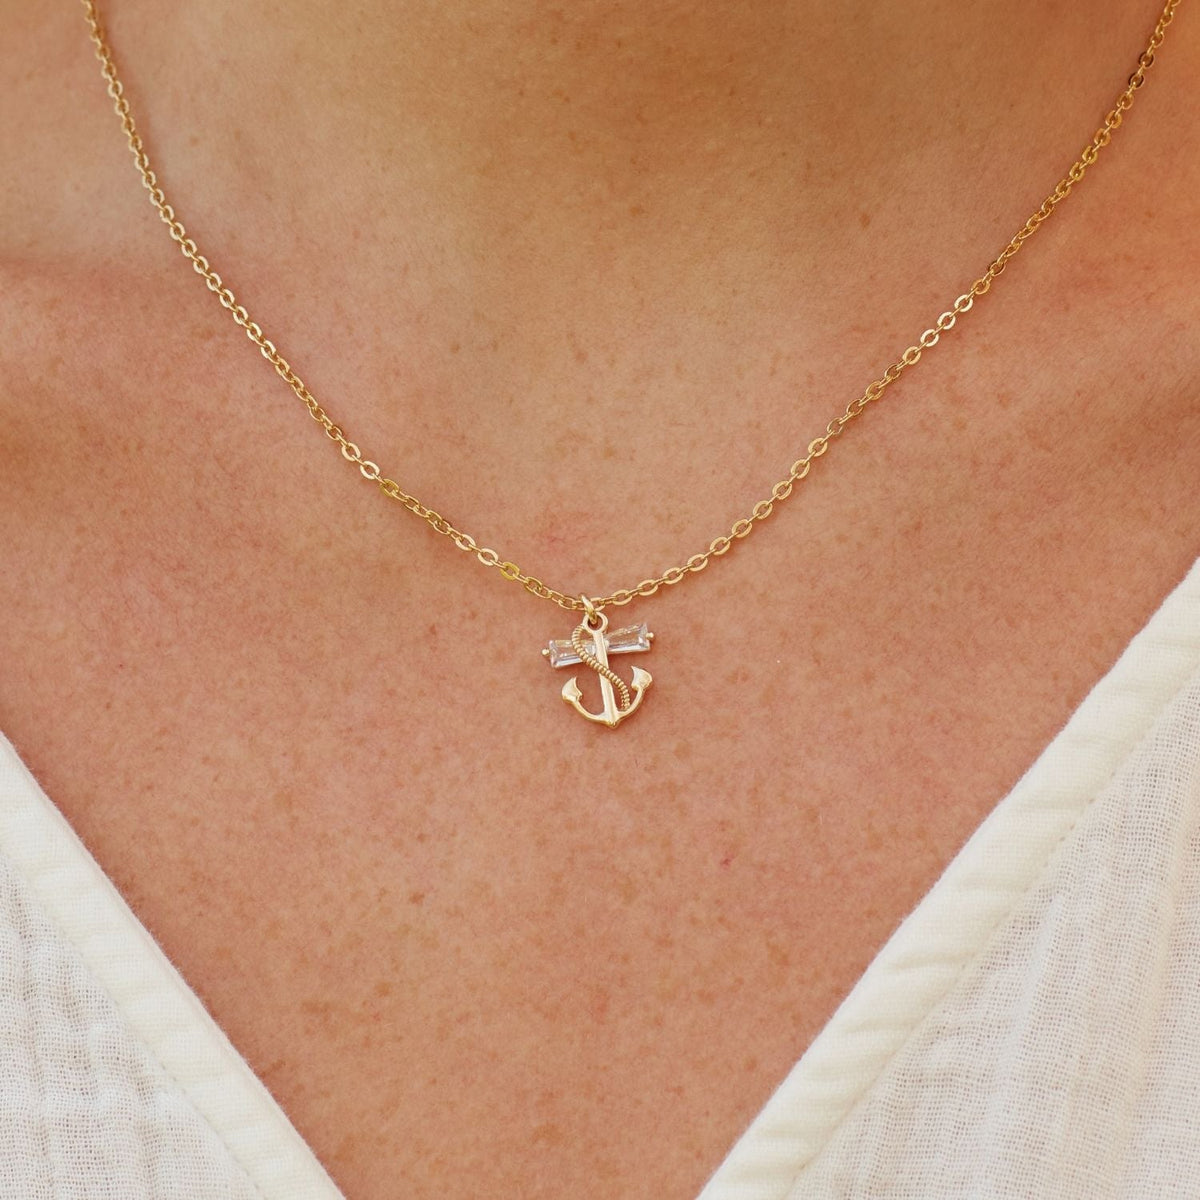 Congratulations on Your First Communion | Holy Spirit Bless You | Anchor Necklace